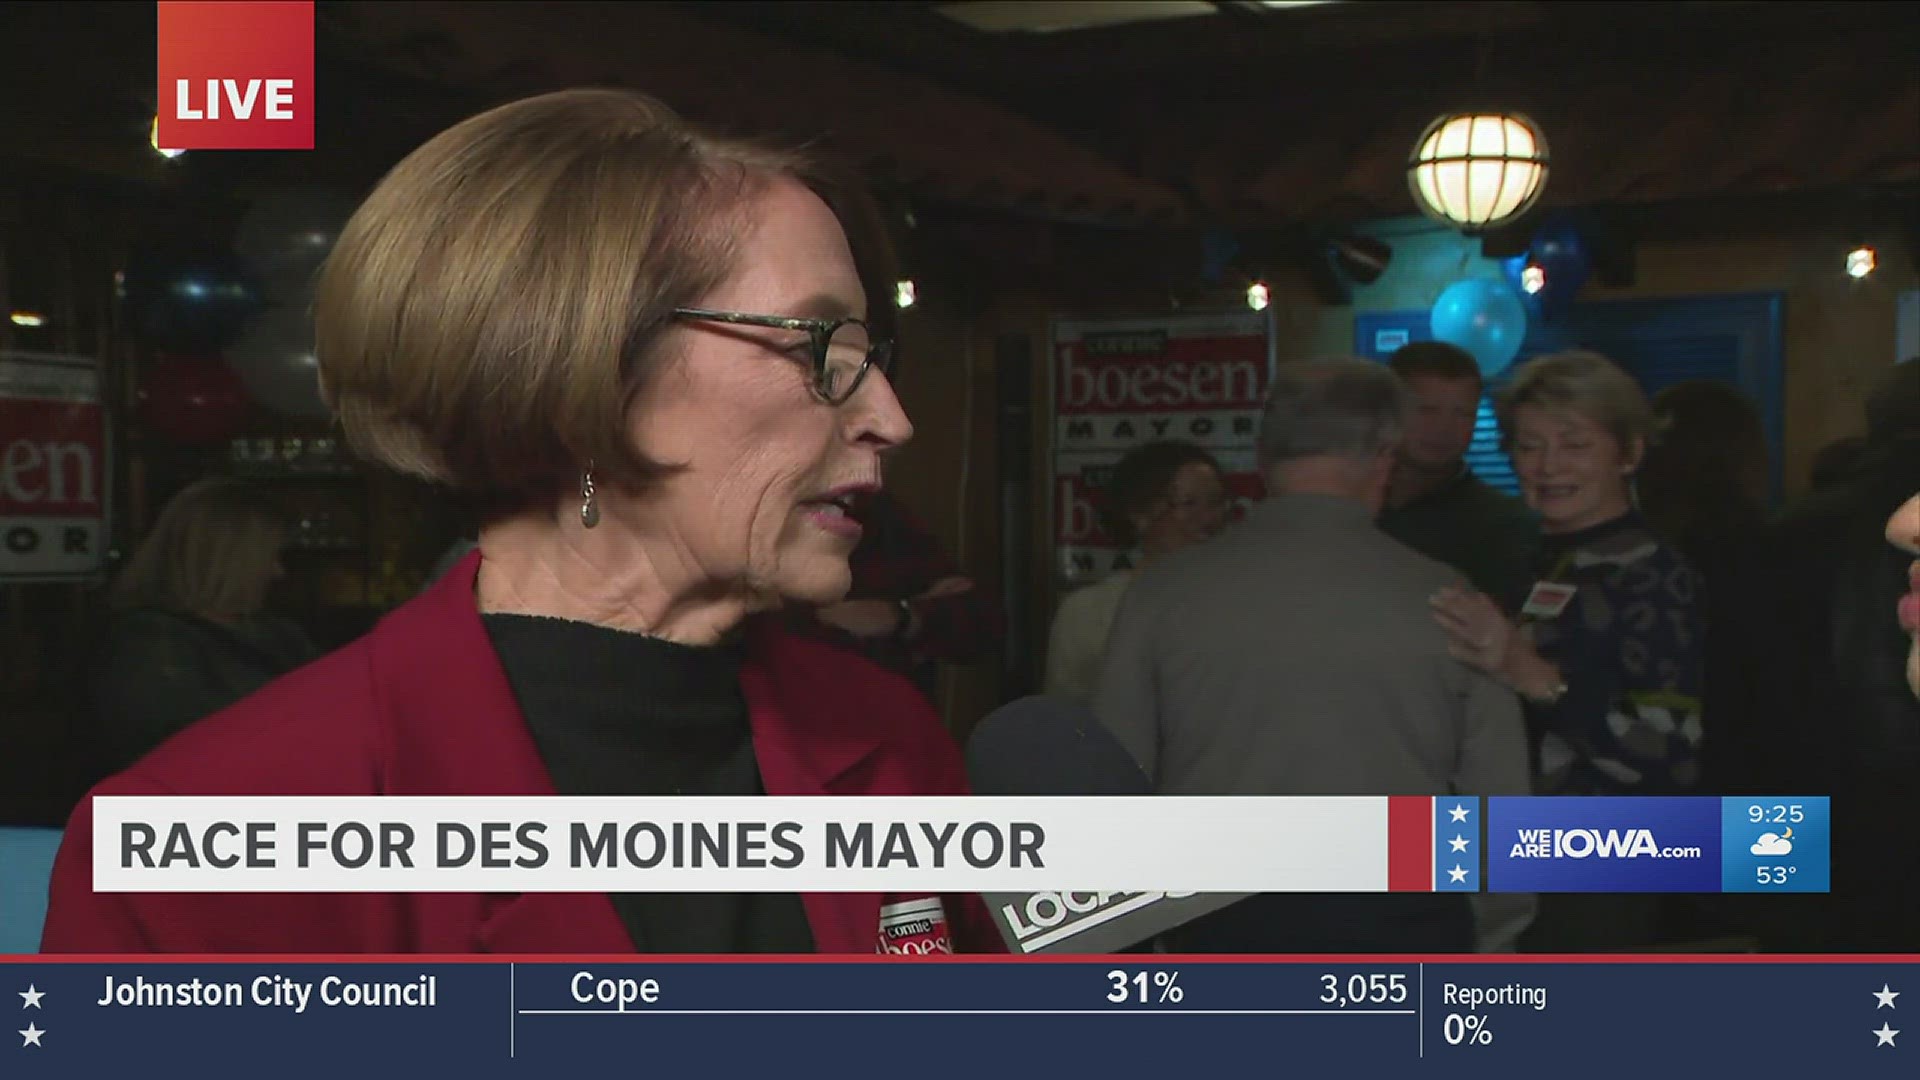 Connie Boesen won the Des Moines mayoral election with 48% of the vote compared to Josh Mandelbaum's 46%, according to Polk County election data.